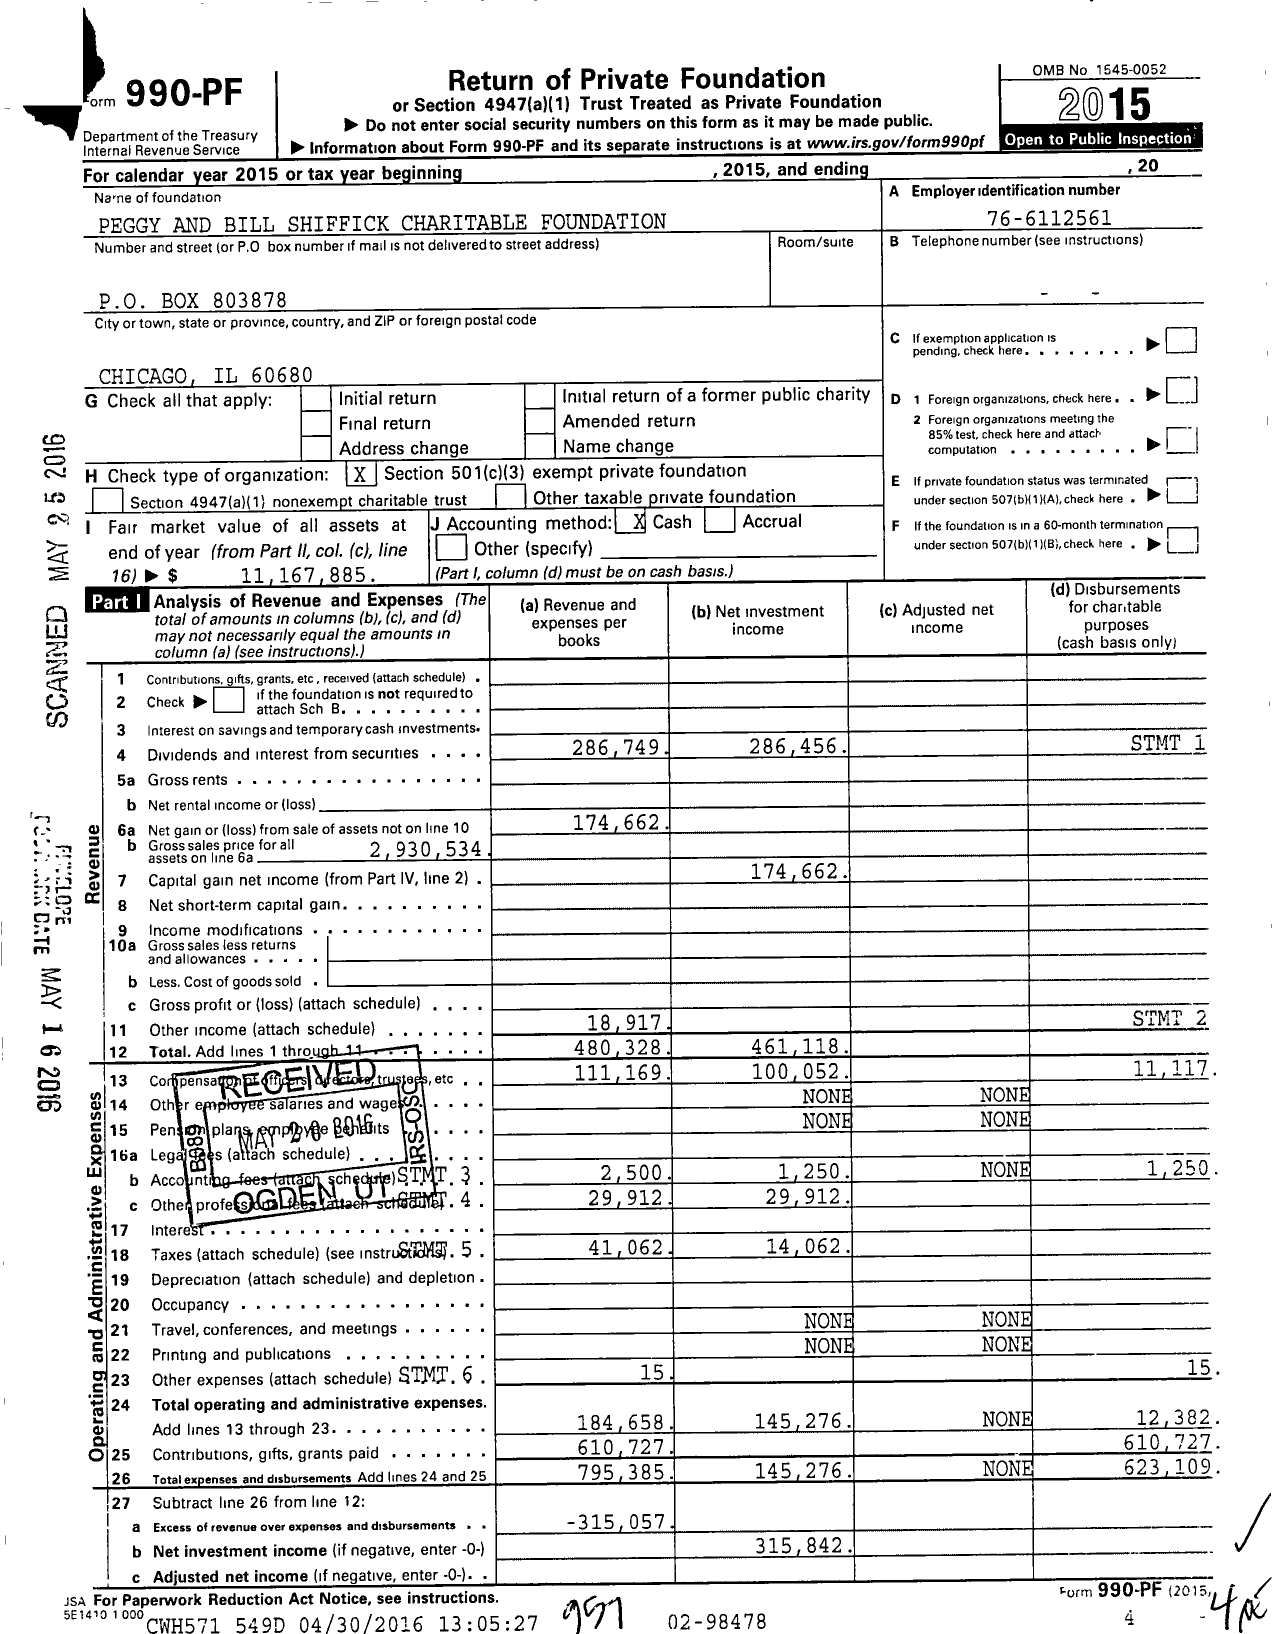 Image of first page of 2015 Form 990PF for Peggy and Bill Shiffick Charitable Foundation